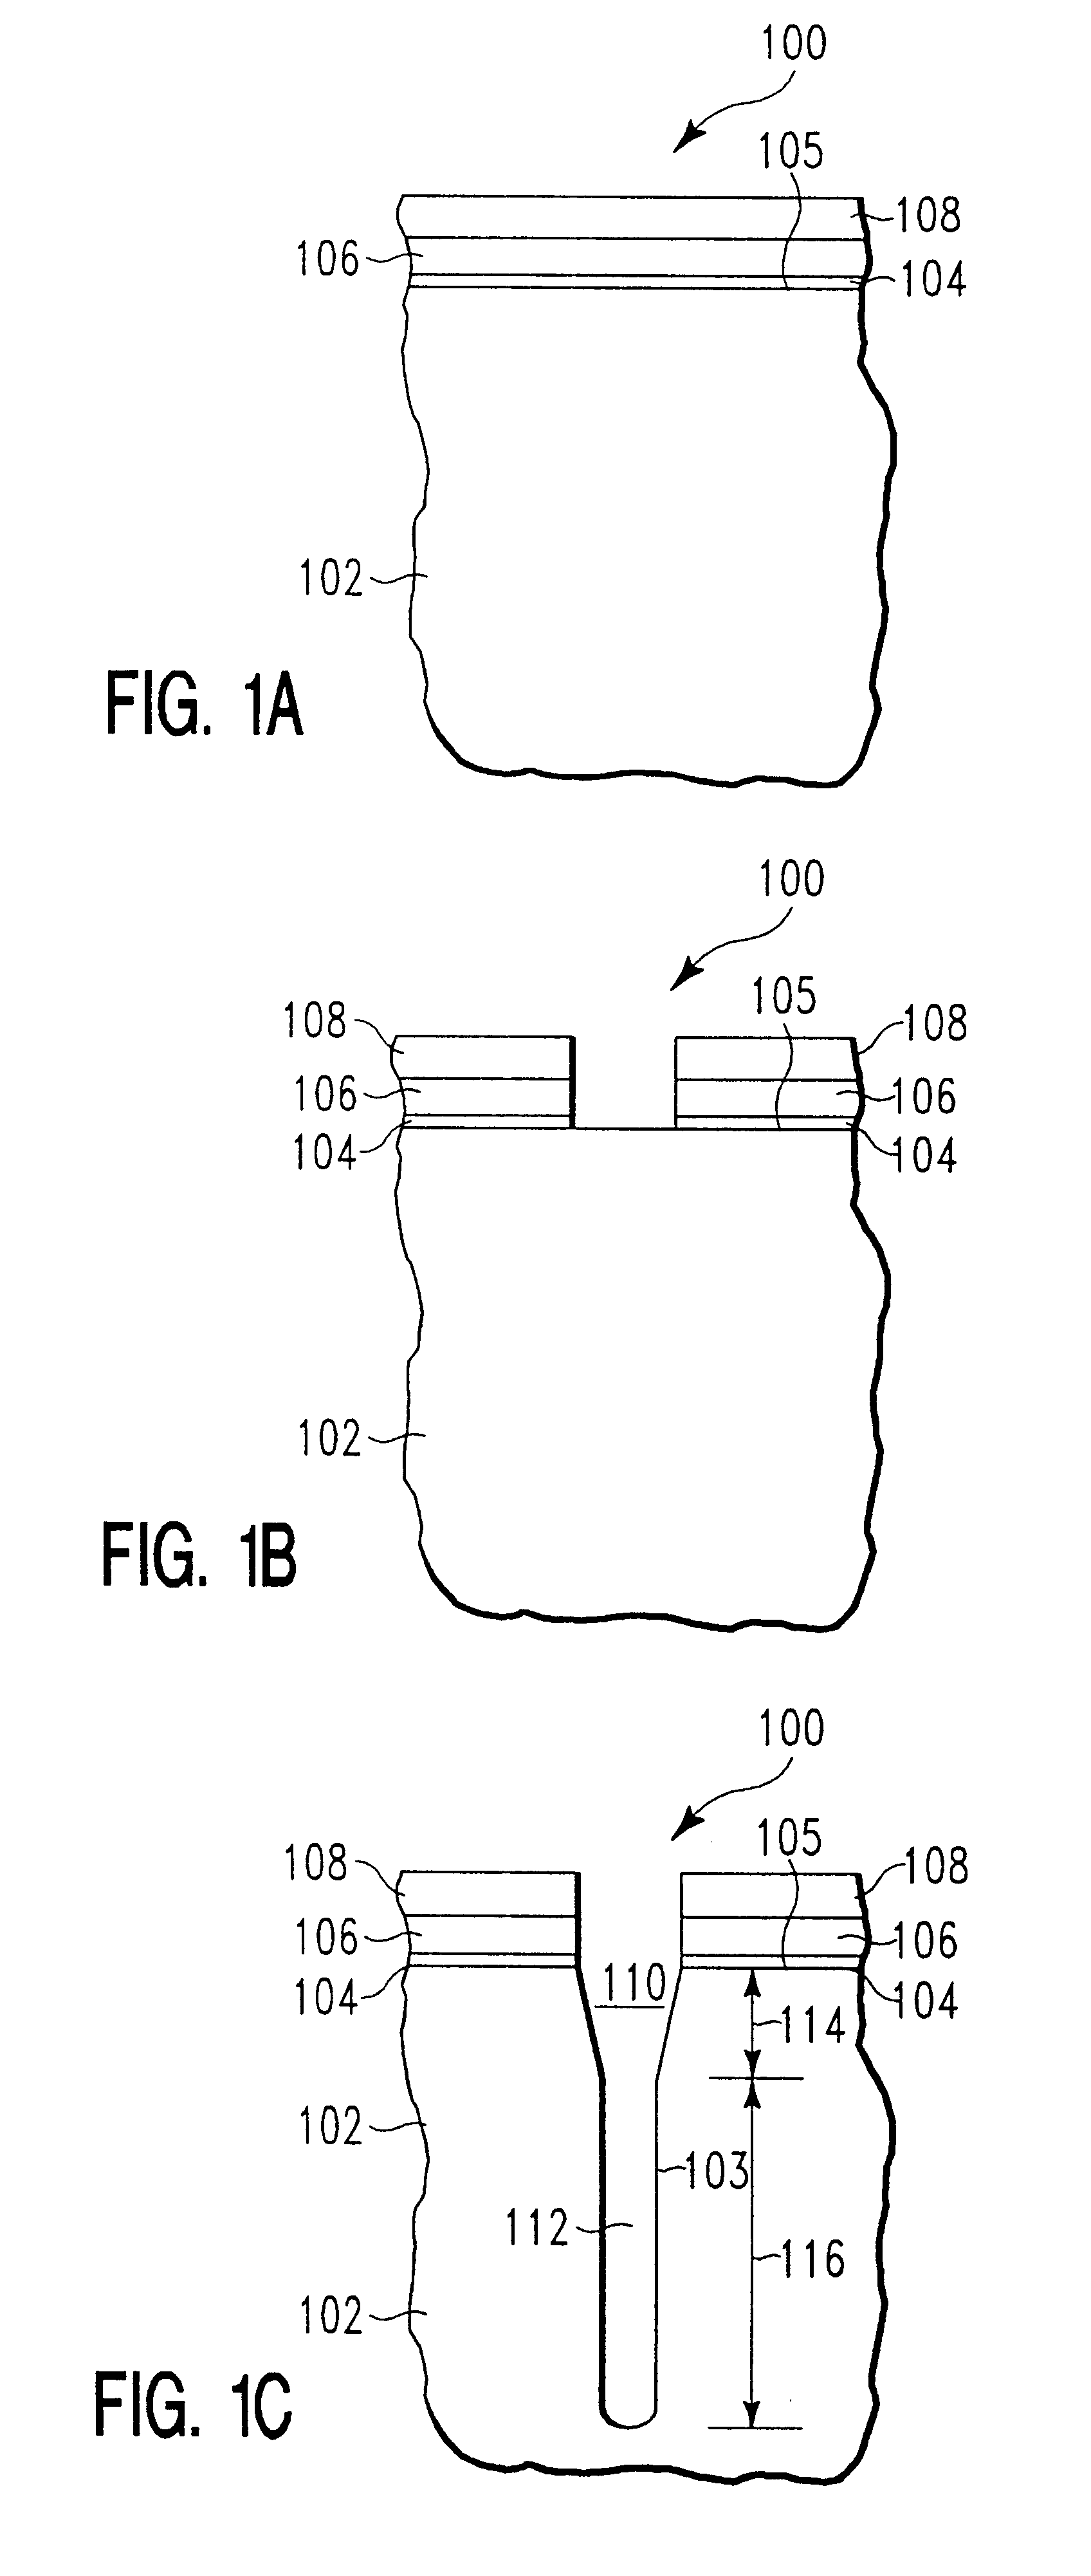 Self cleaning method of forming deep trenches in silicon substrates